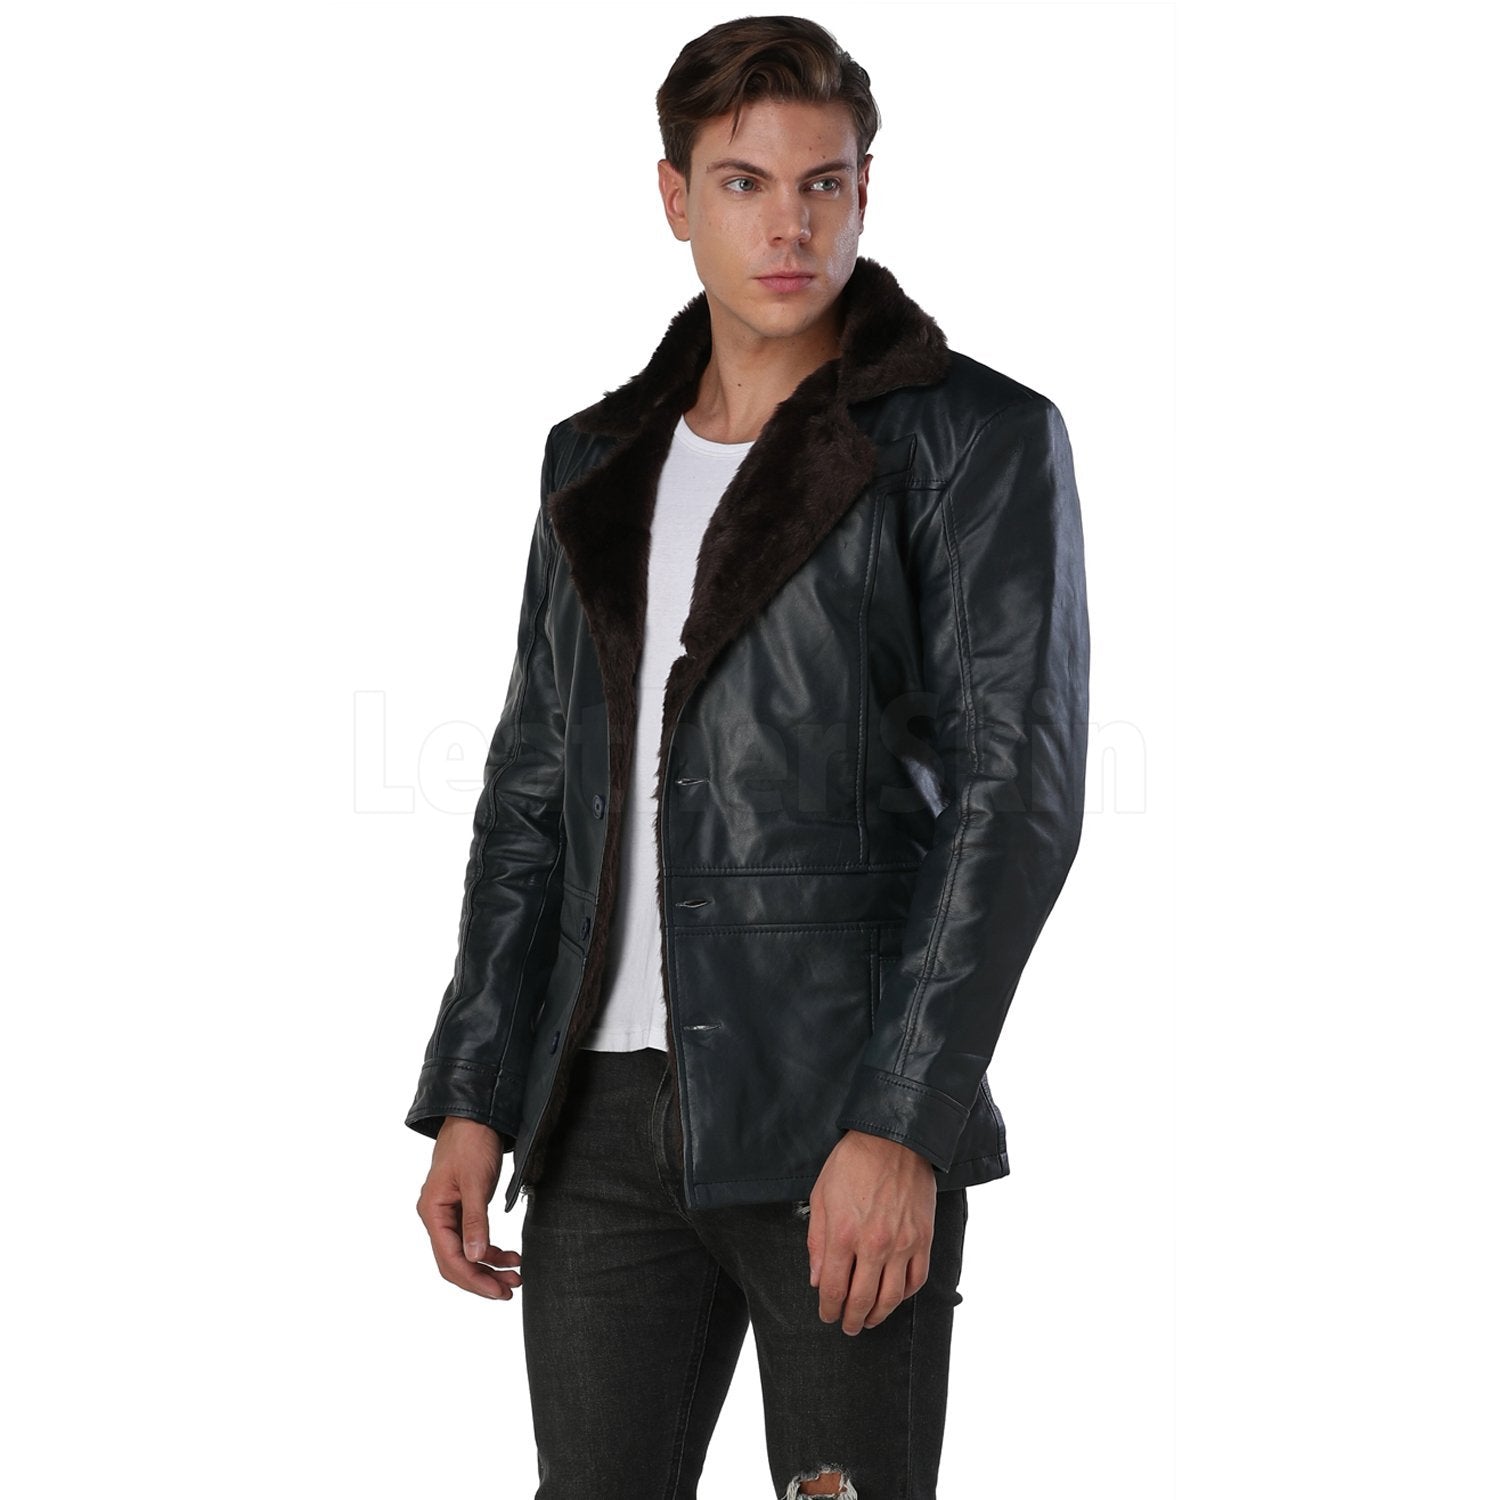 Home / Products / Men's Navy Blue Leather Coat